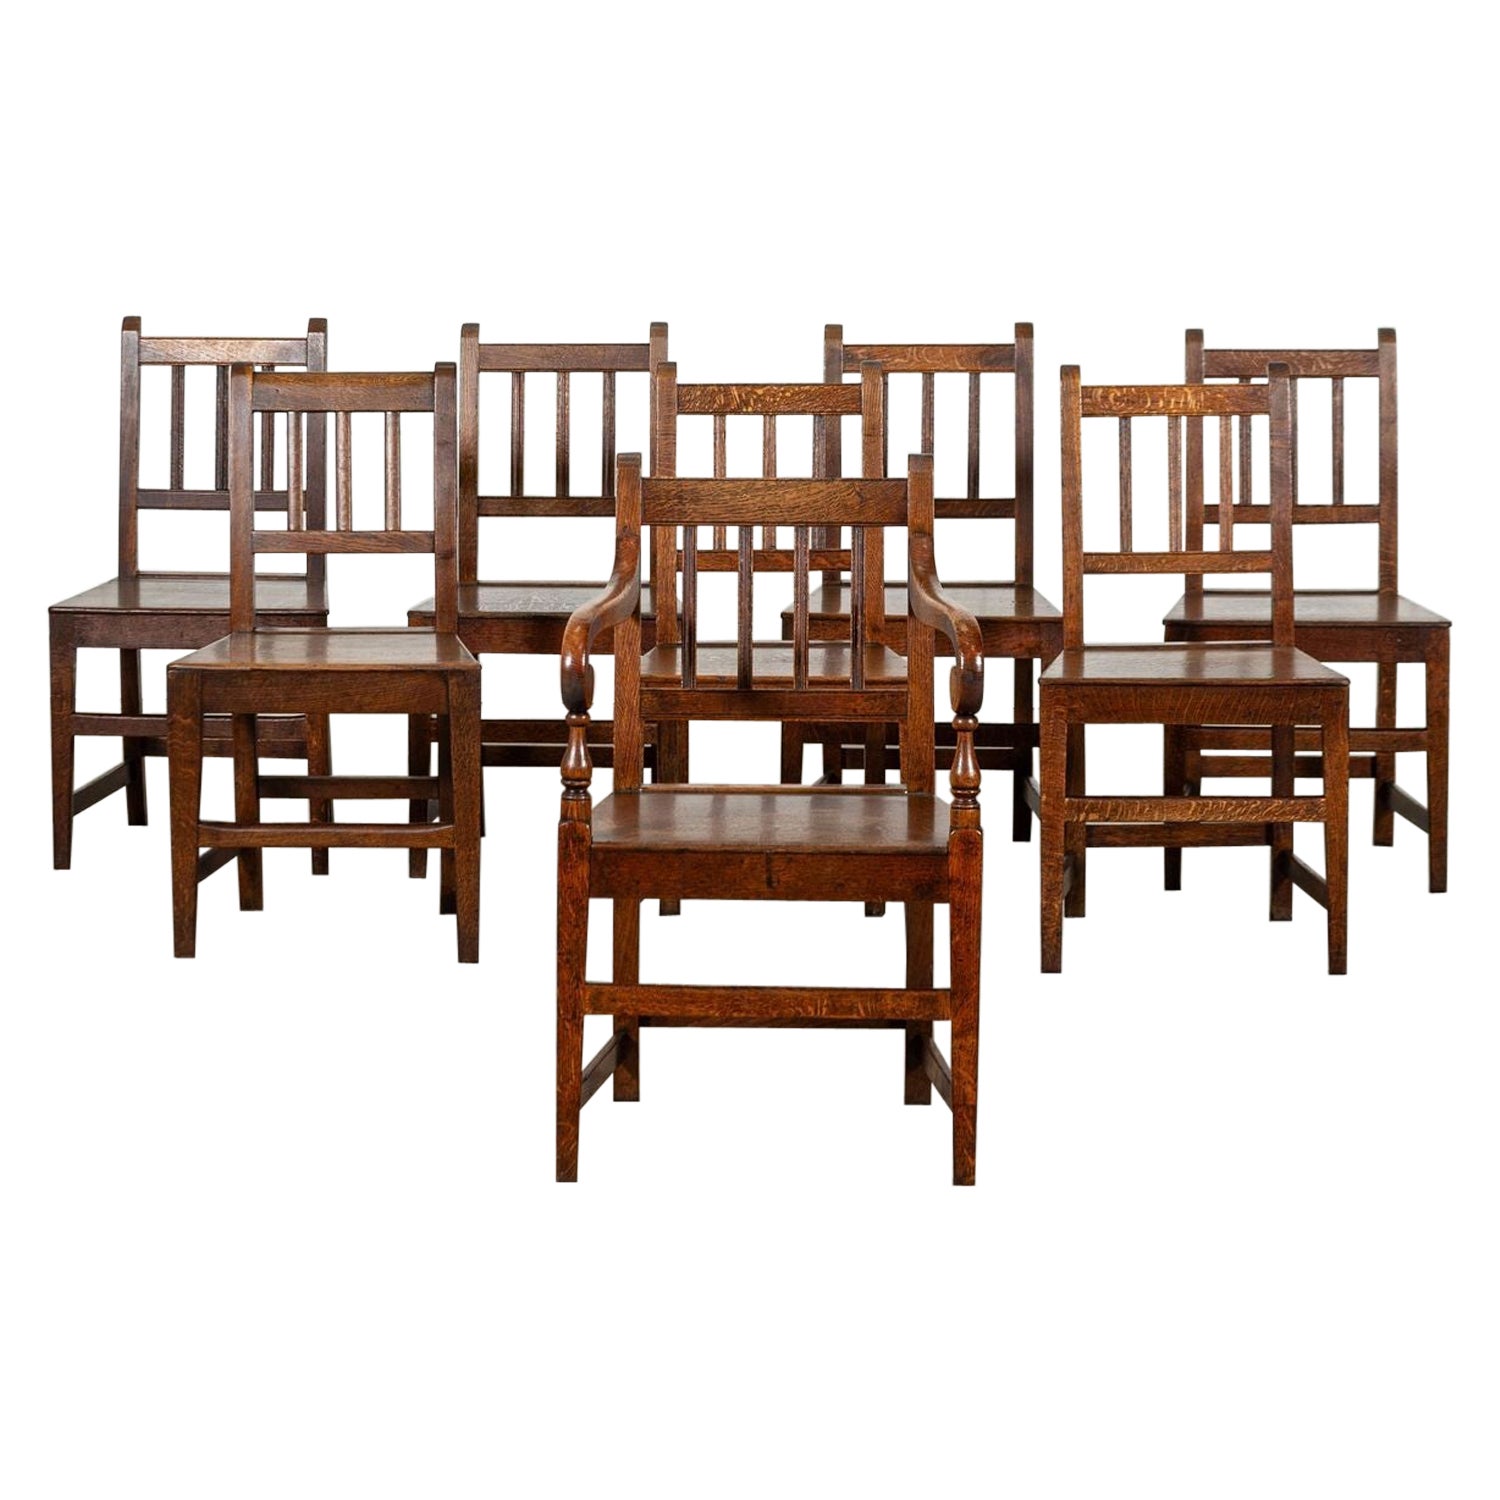 Set 8 19thC English Oak Vernacular Chairs For Sale